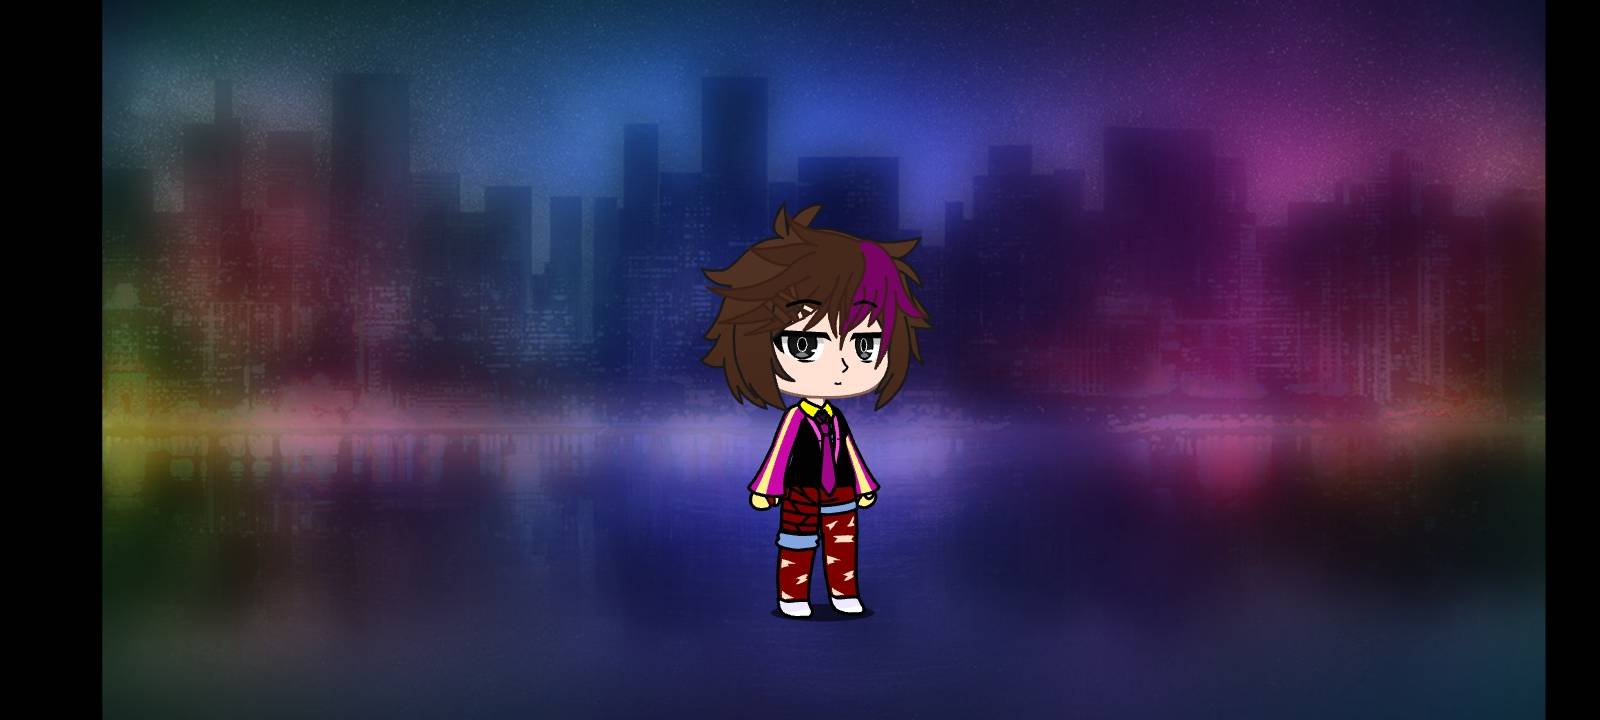 How to make William Afton in Gacha Club - Gacha Outfits